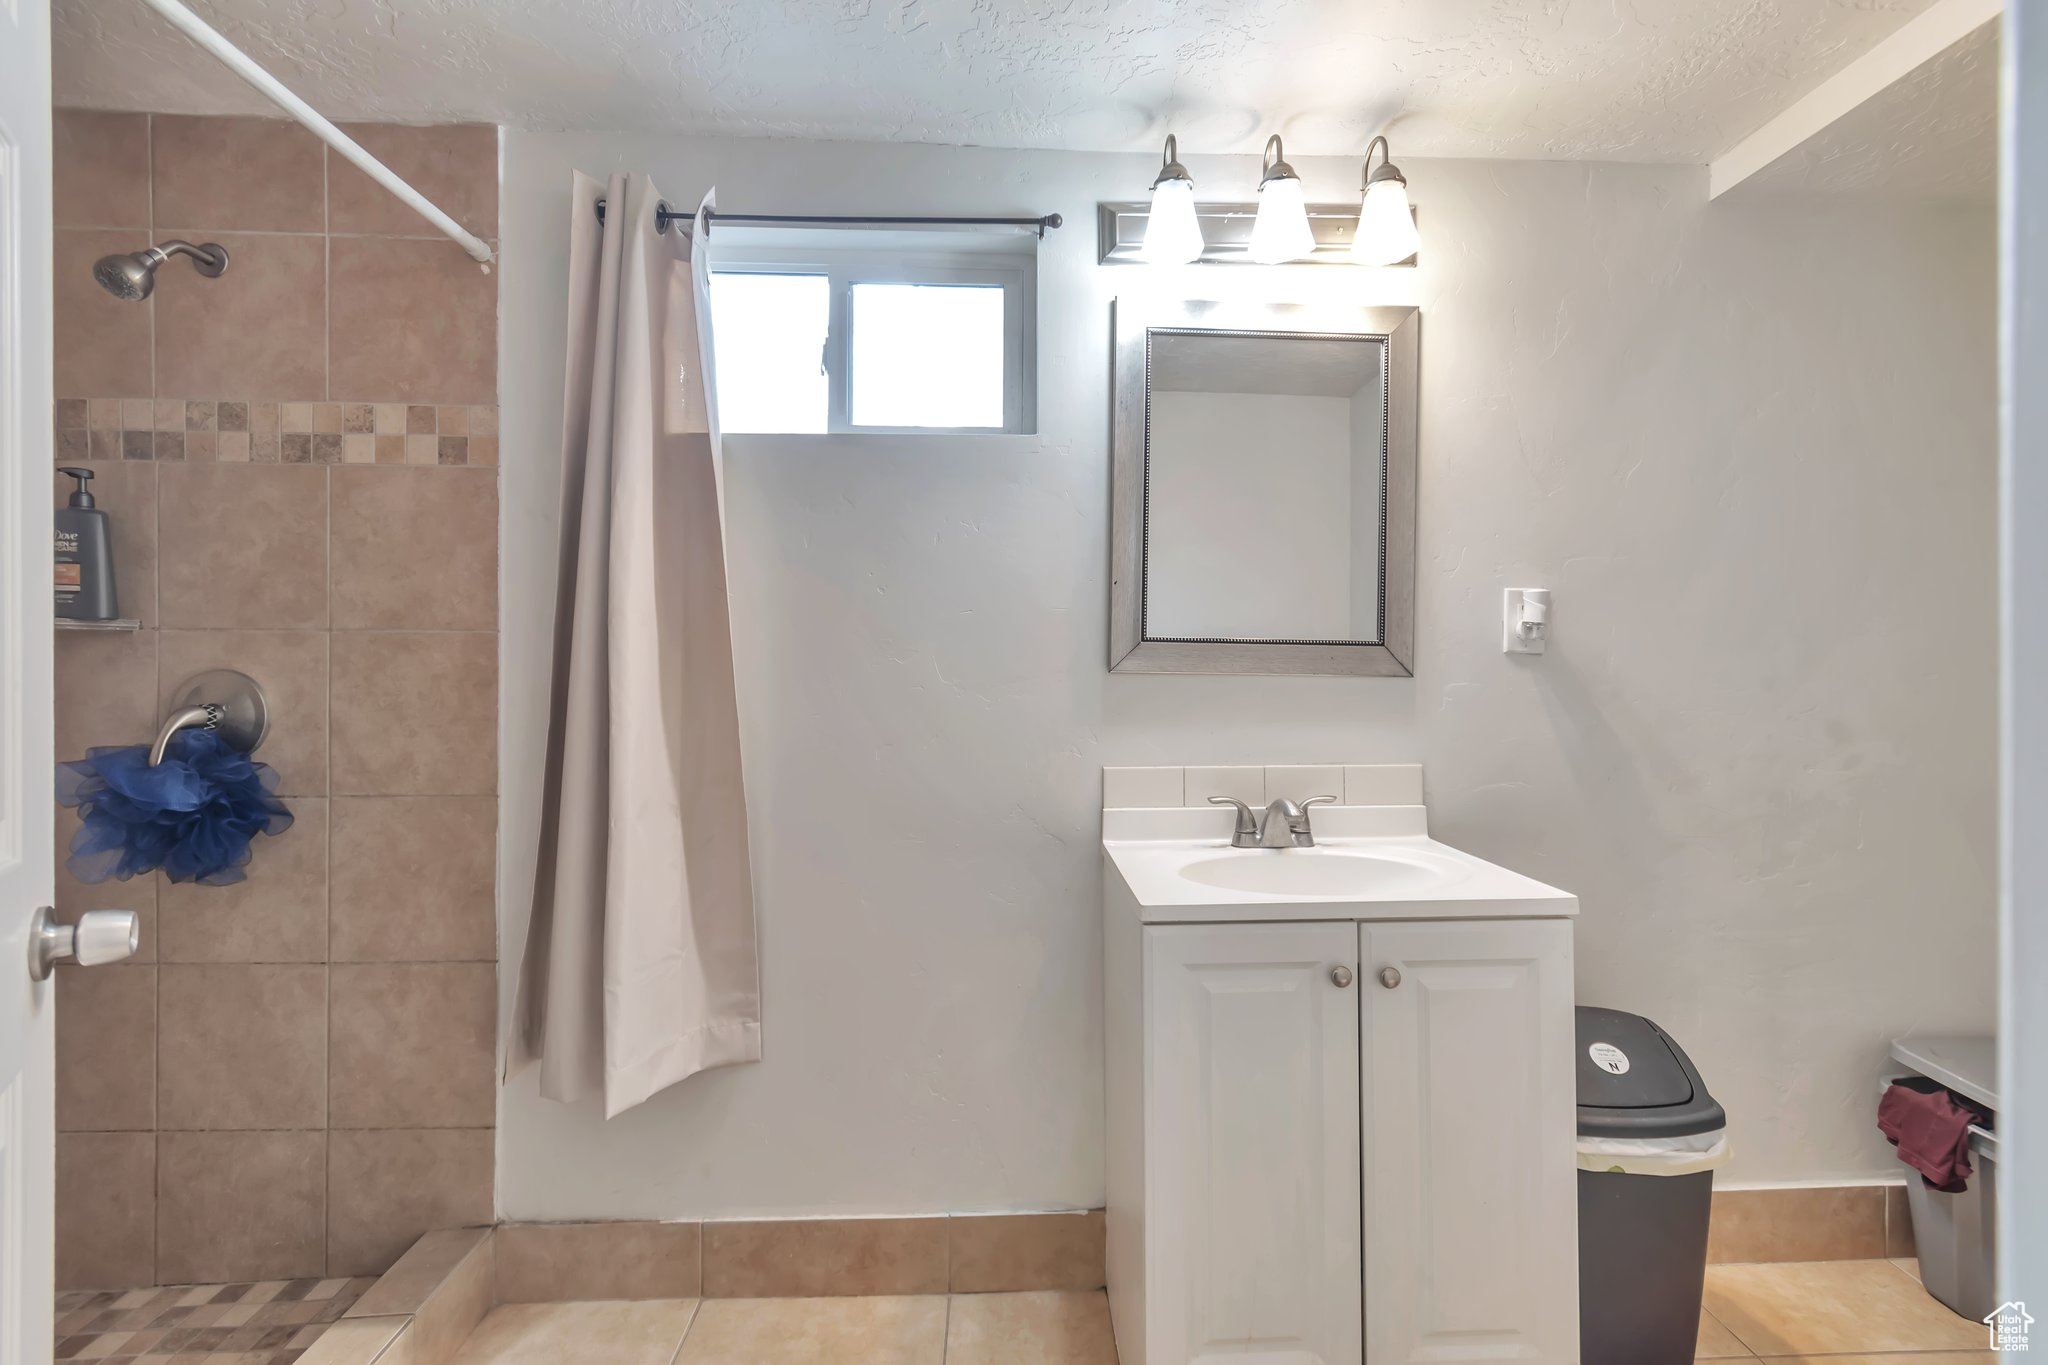 Bathroom featuring vanity with extensive cabinet space, tile floors, walk in shower, and a textured ceiling